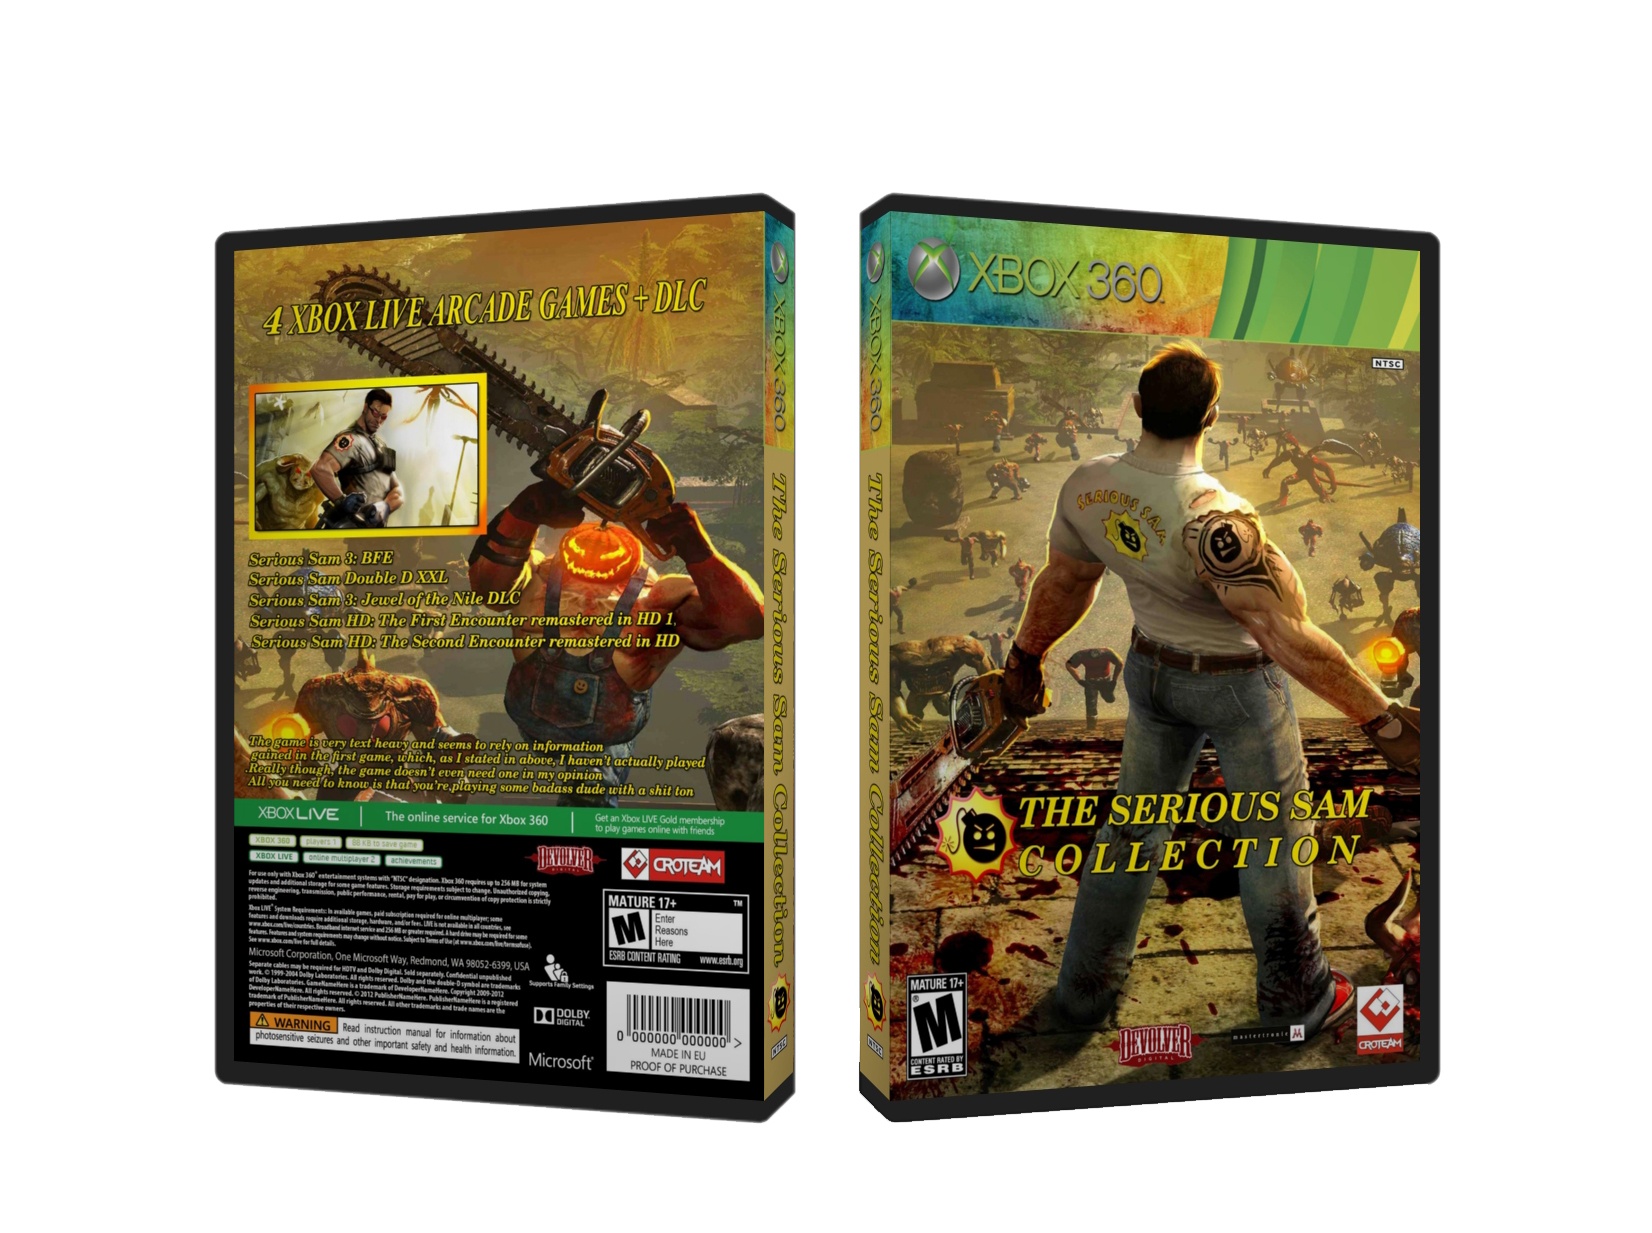 The Serious Sam Collection box cover